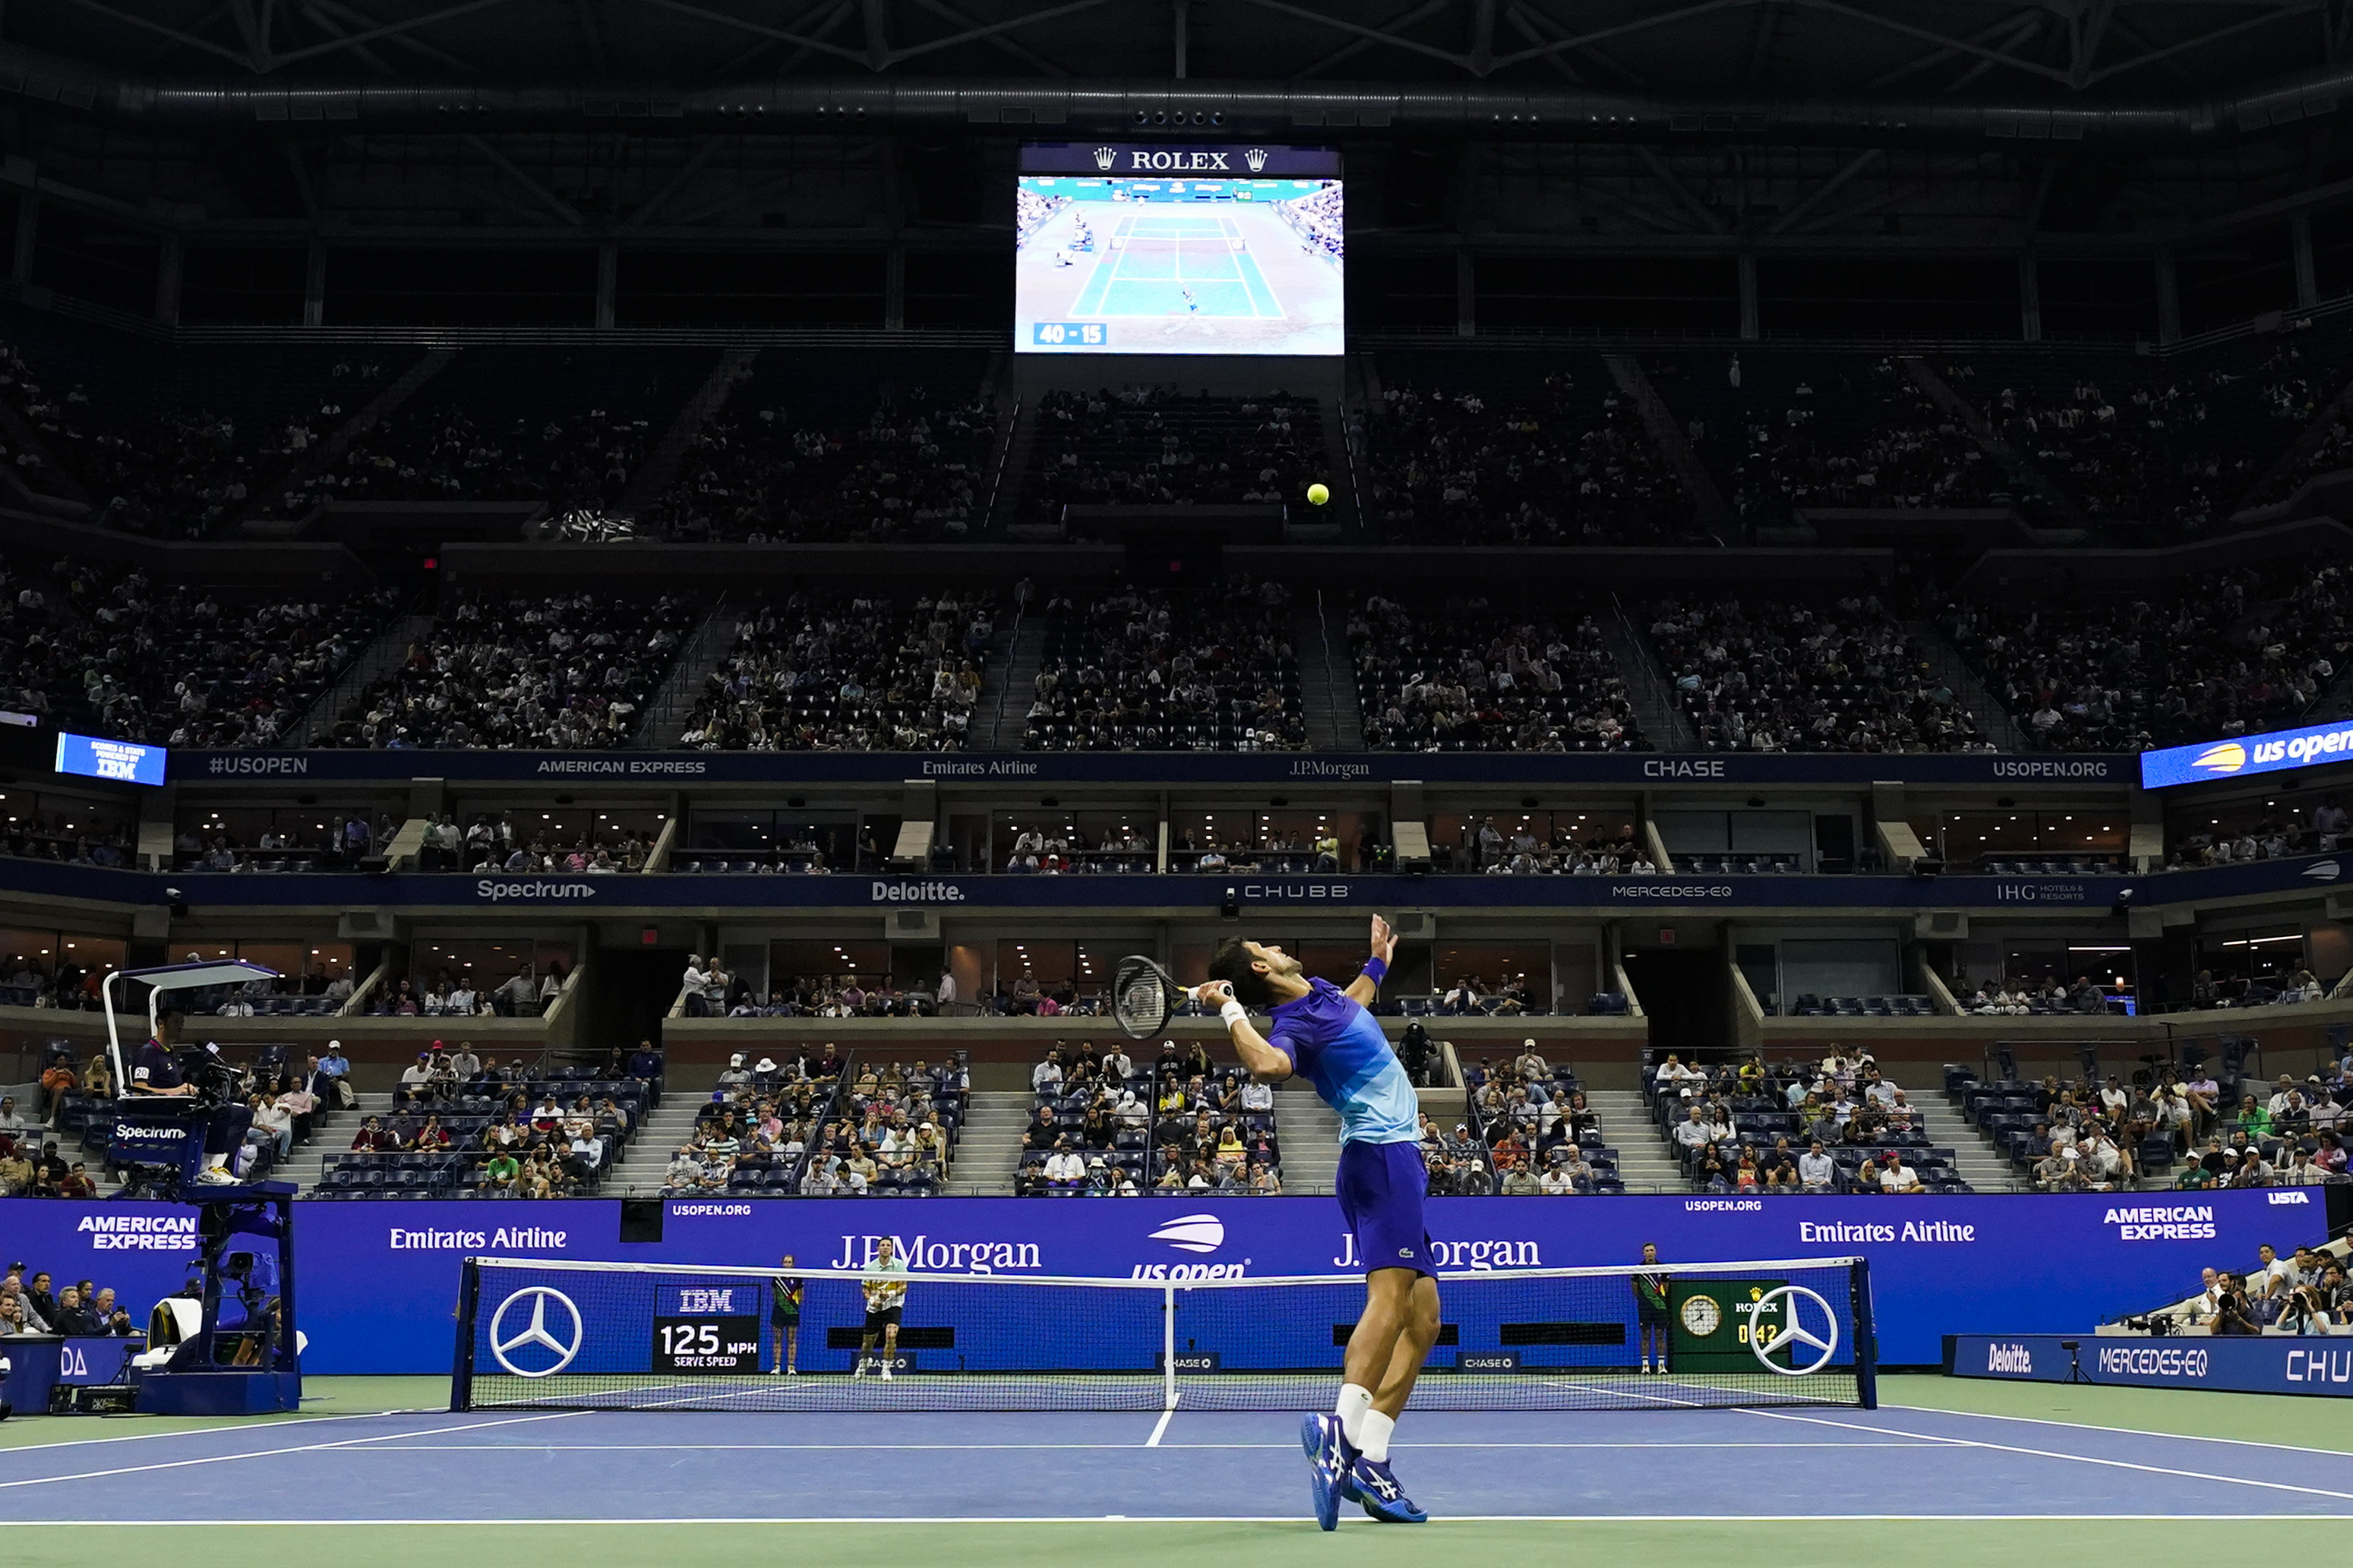 How to watch US Open quarterfinals Time, TV channel, live stream Djokovic vs